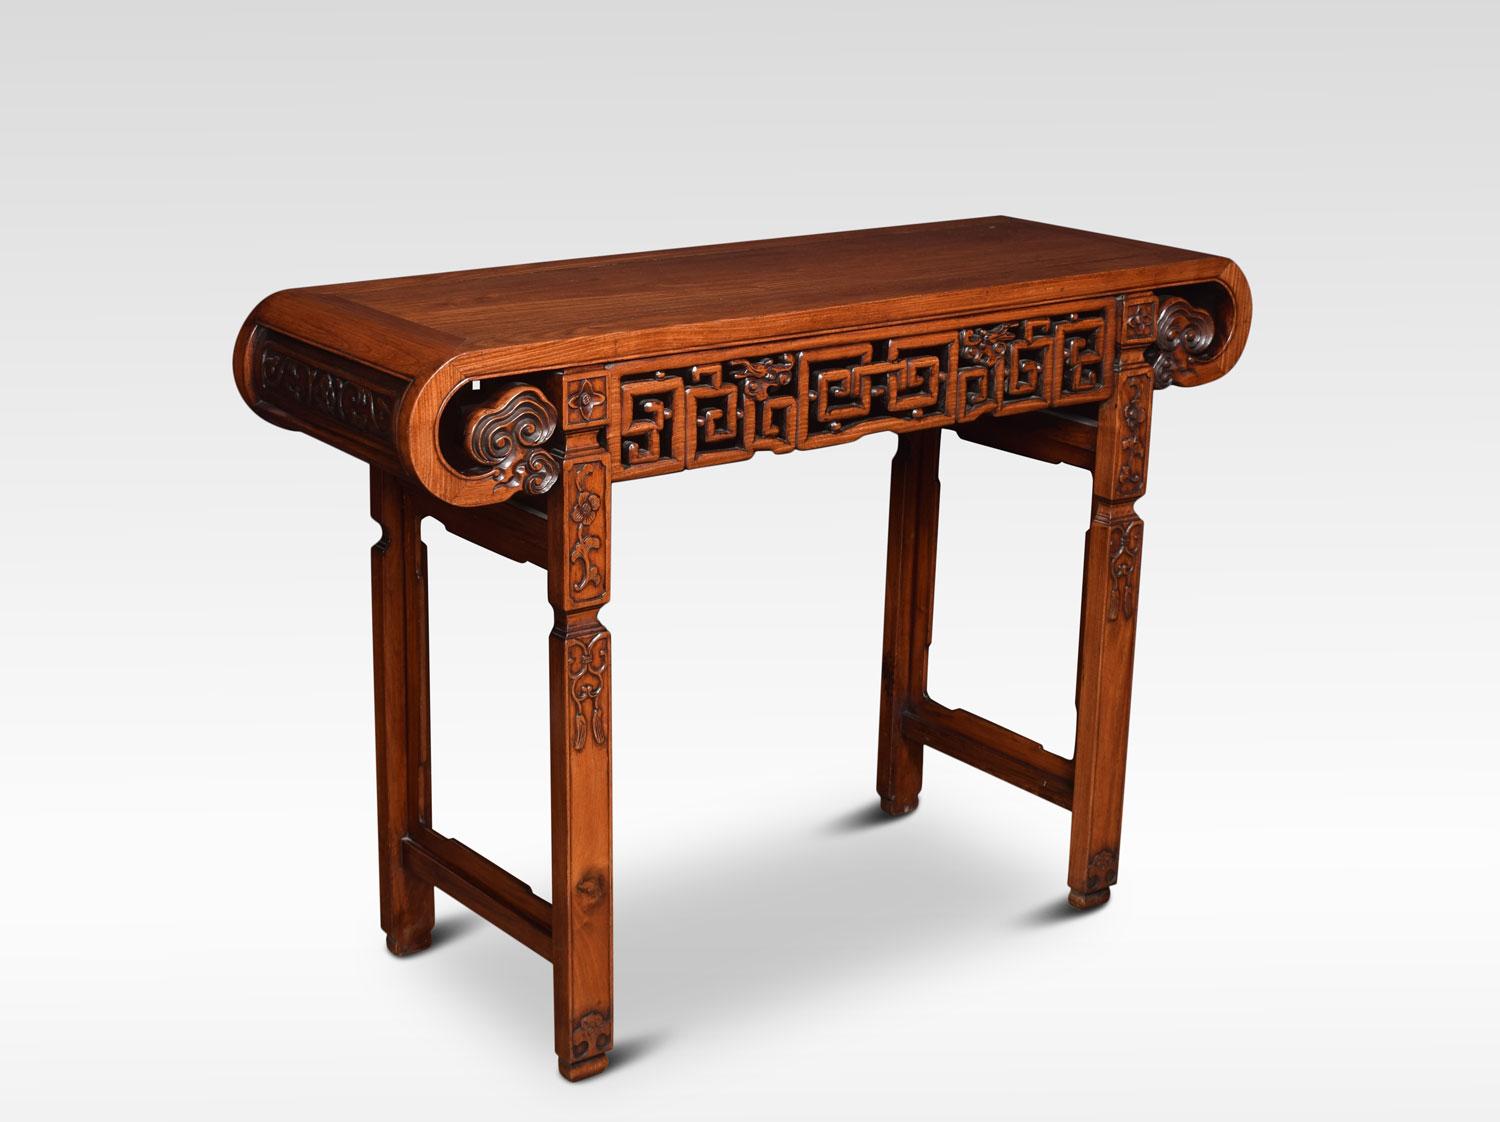 Chinese alter table the rectangular top with shaped ends. To the geometrically pierced frieze carved with dragons heads. All raised up on square section legs. With flowering stems and tassel and scrollwork, united by stretchers.
Dimensions:
Height